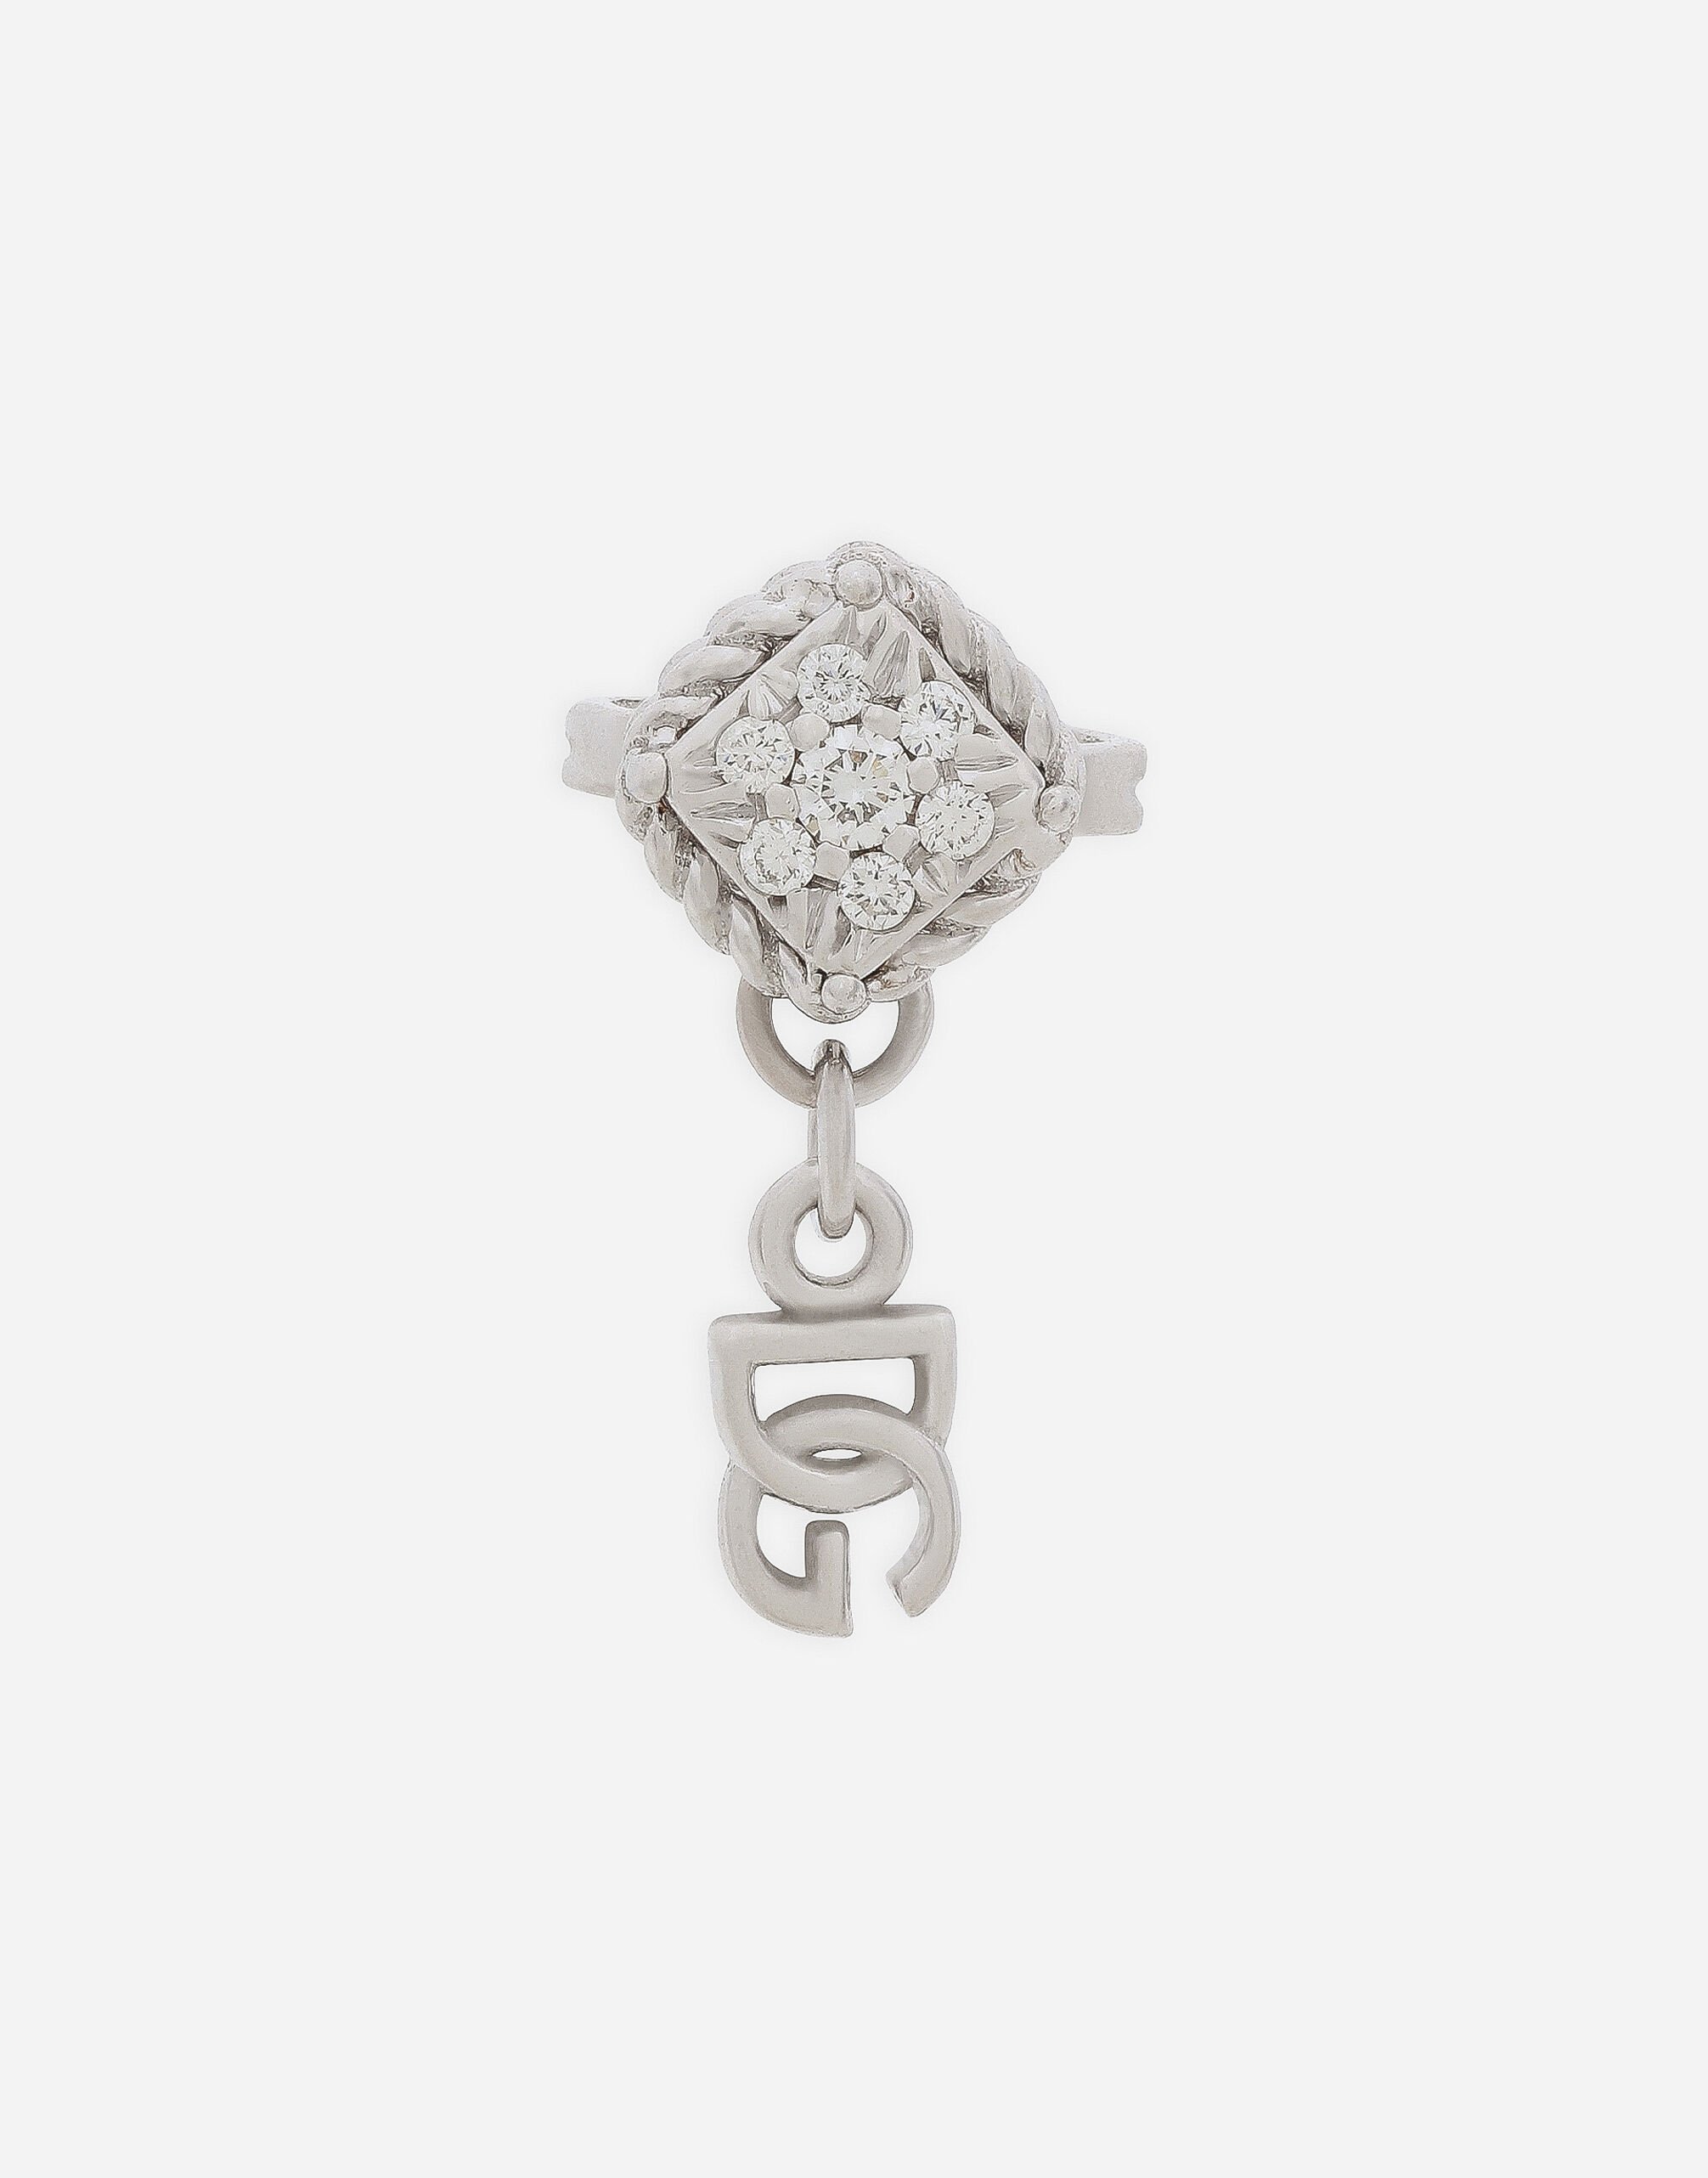 ${brand} Single earring in white gold 18kt with diamonds pavé ${colorDescription} ${masterID}